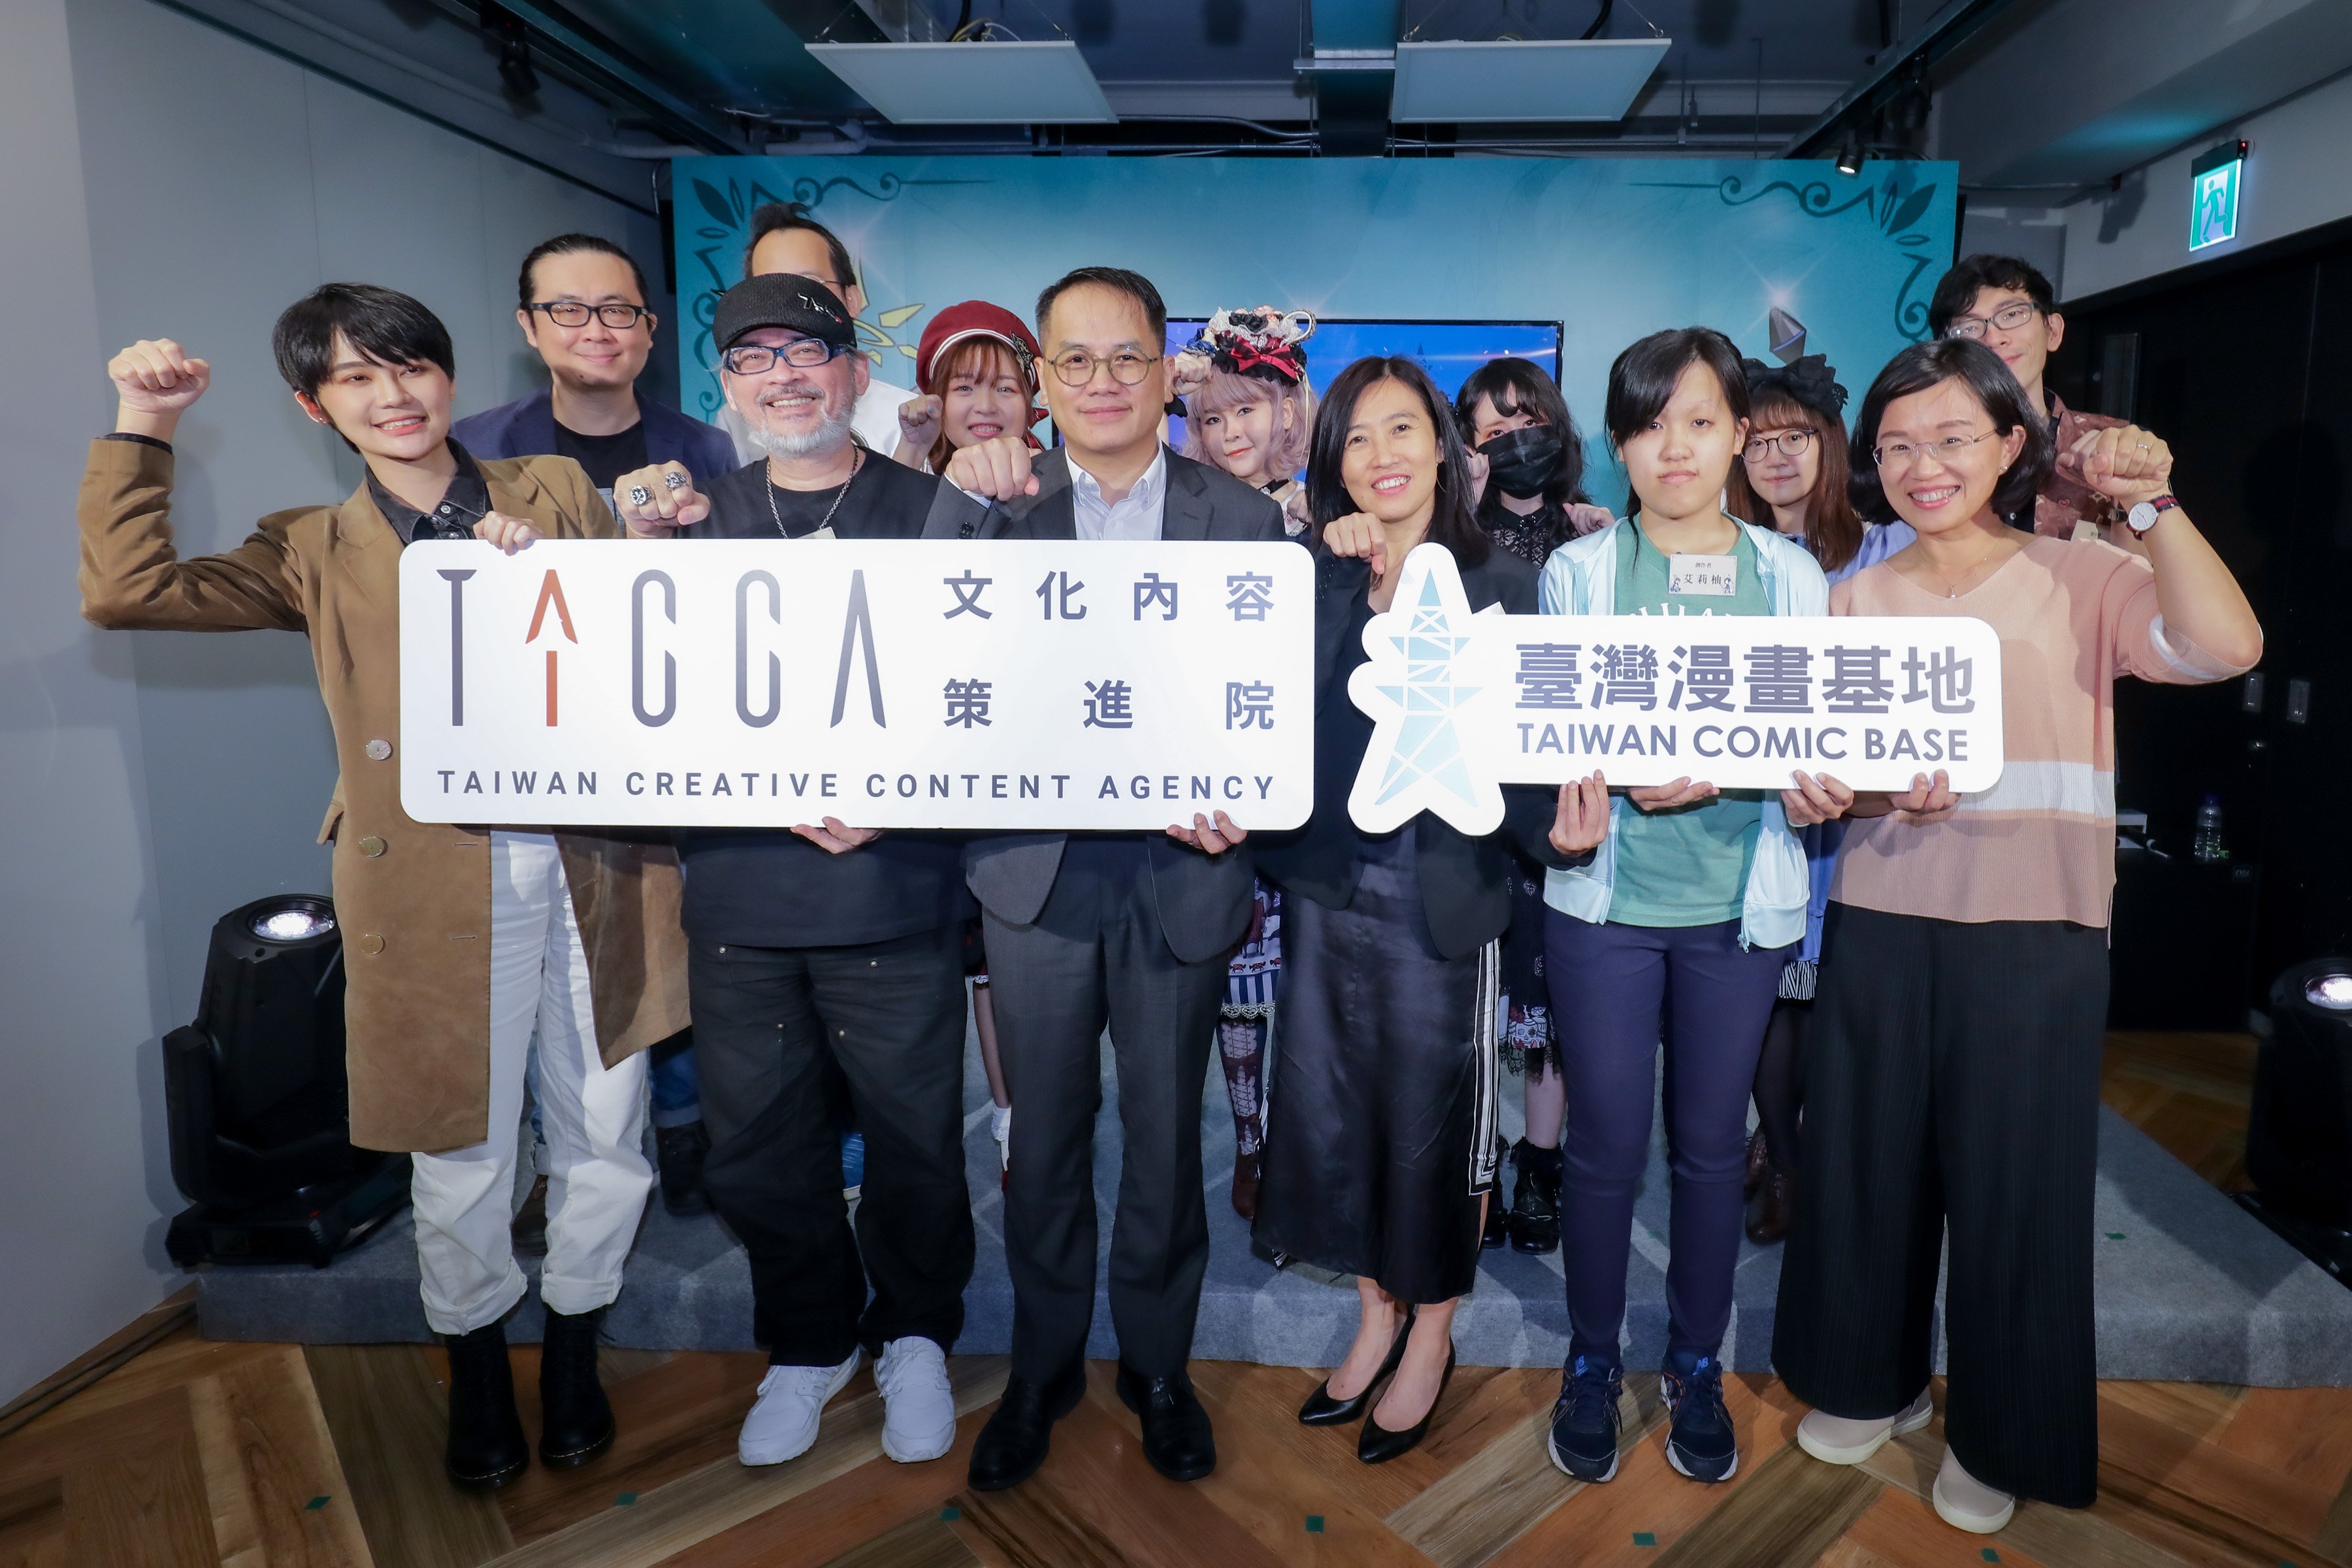 TAICCA Celebrates the Reopening of the Taiwan Comic Base 